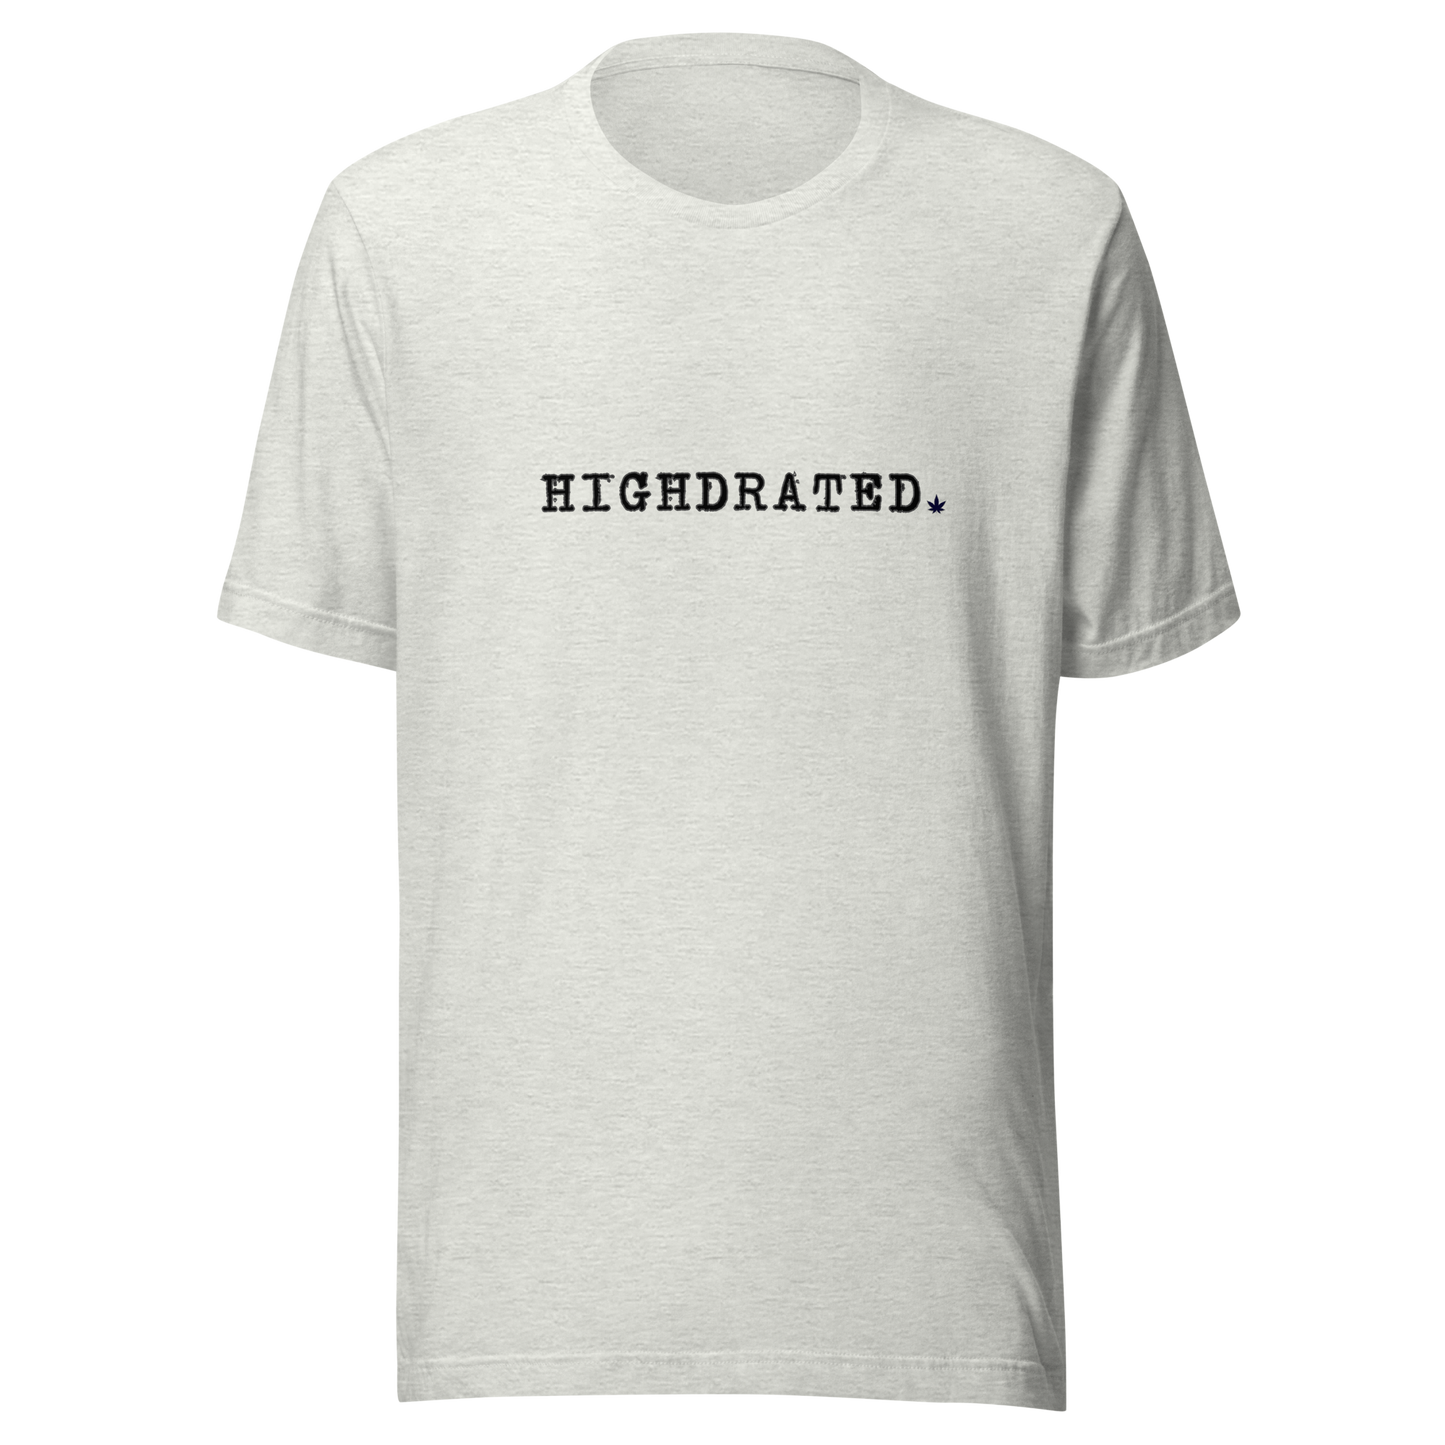 highdrated t-shirt in white - gaslit apparel